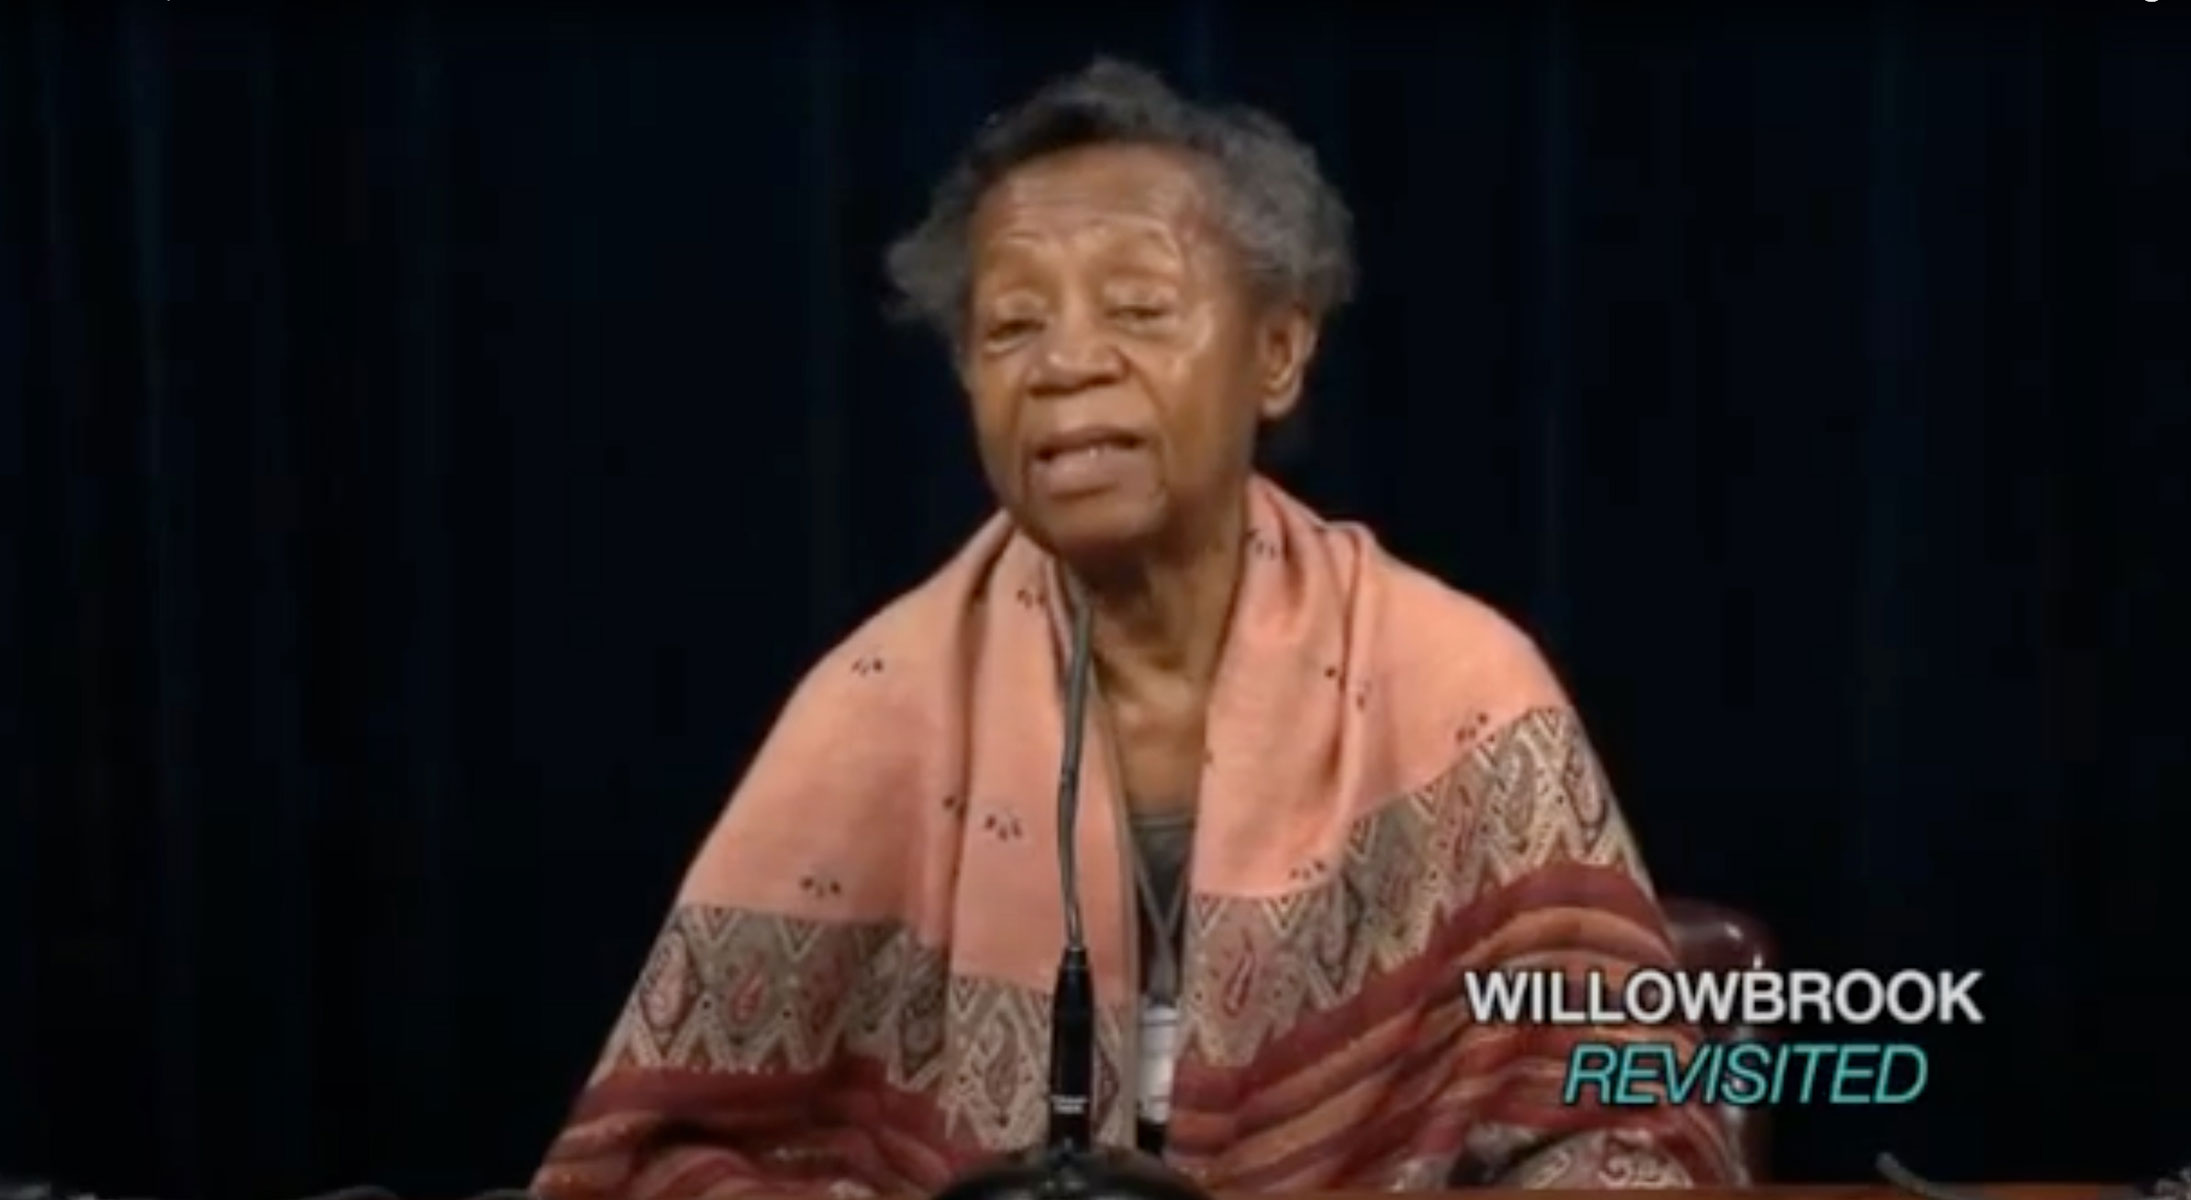 Still image from a video interview of Willie Mae Goodman, an older black woman.